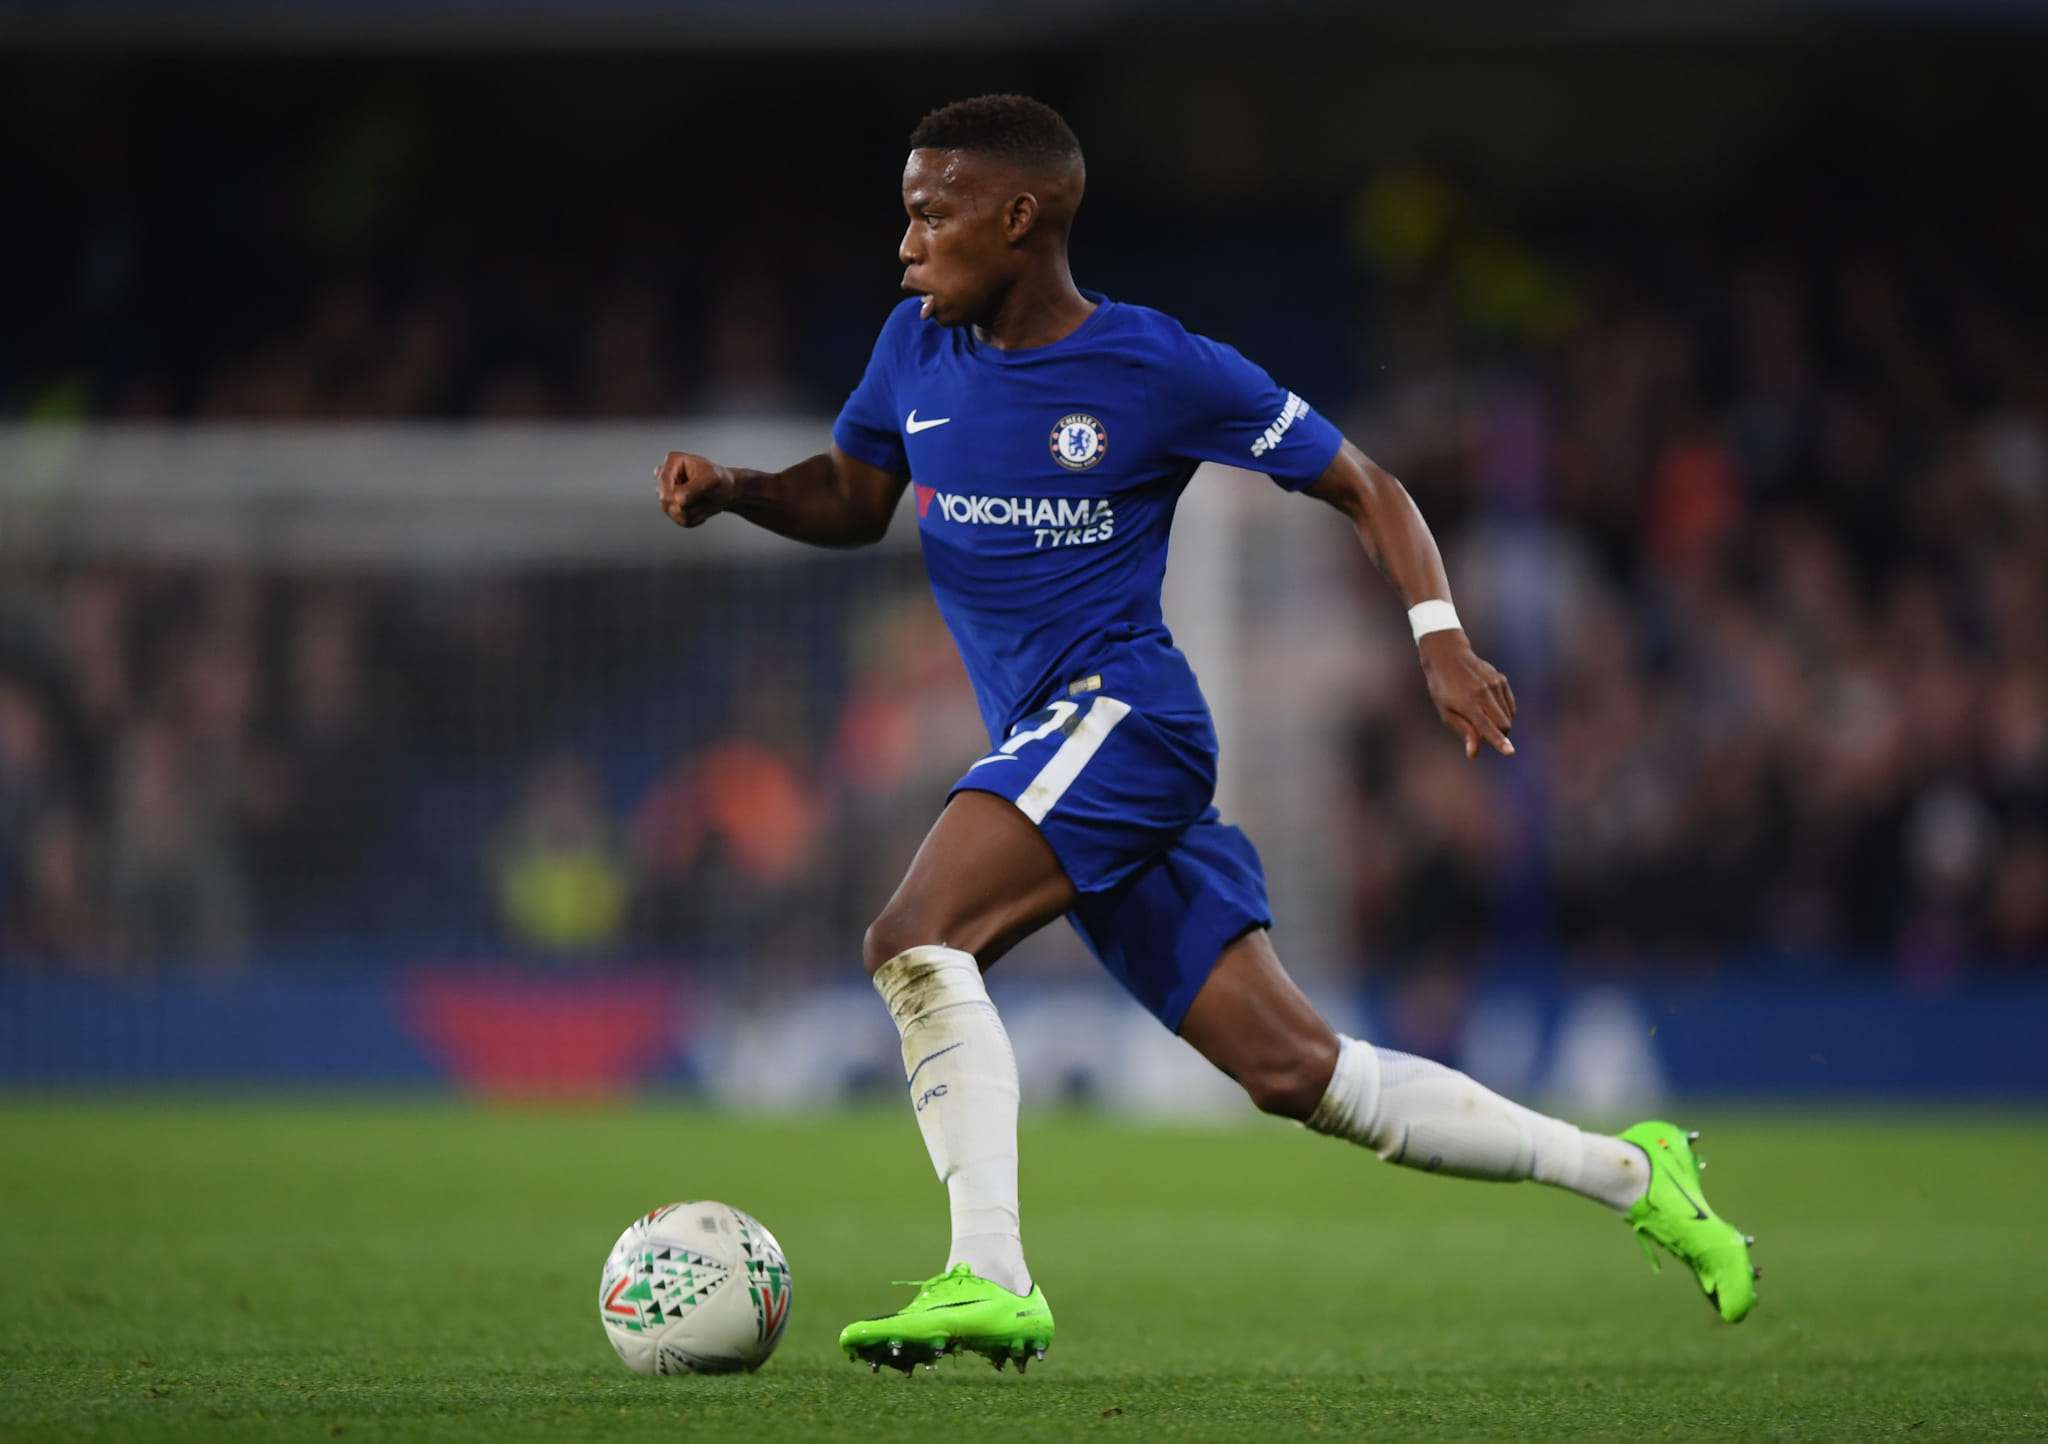 ZAMBIAN ELIGIBLE WINGER CHARLY MUSONDA IS SET TO LEAVE CHELSEA FOOTBALL CLUB